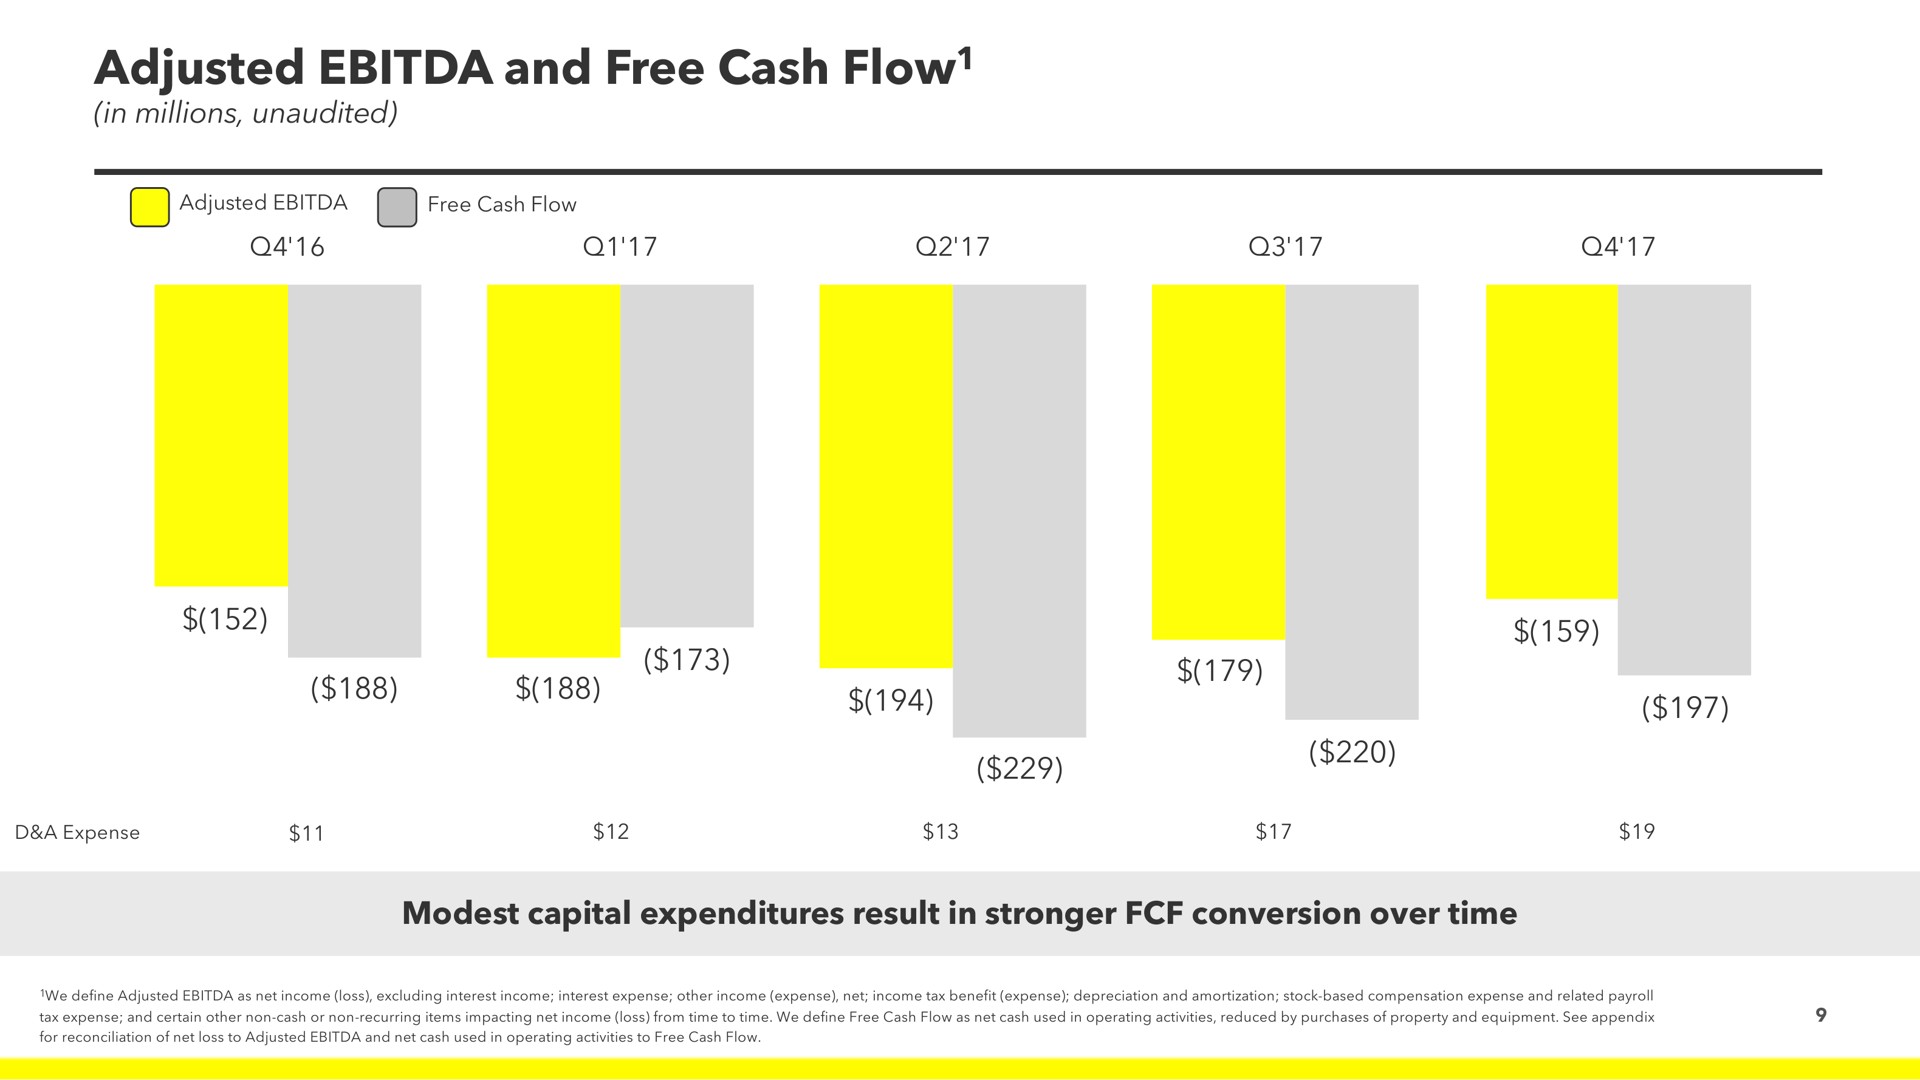 adjusted and free cash flow modest capital expenditures result in conversion over time flow | Snap Inc